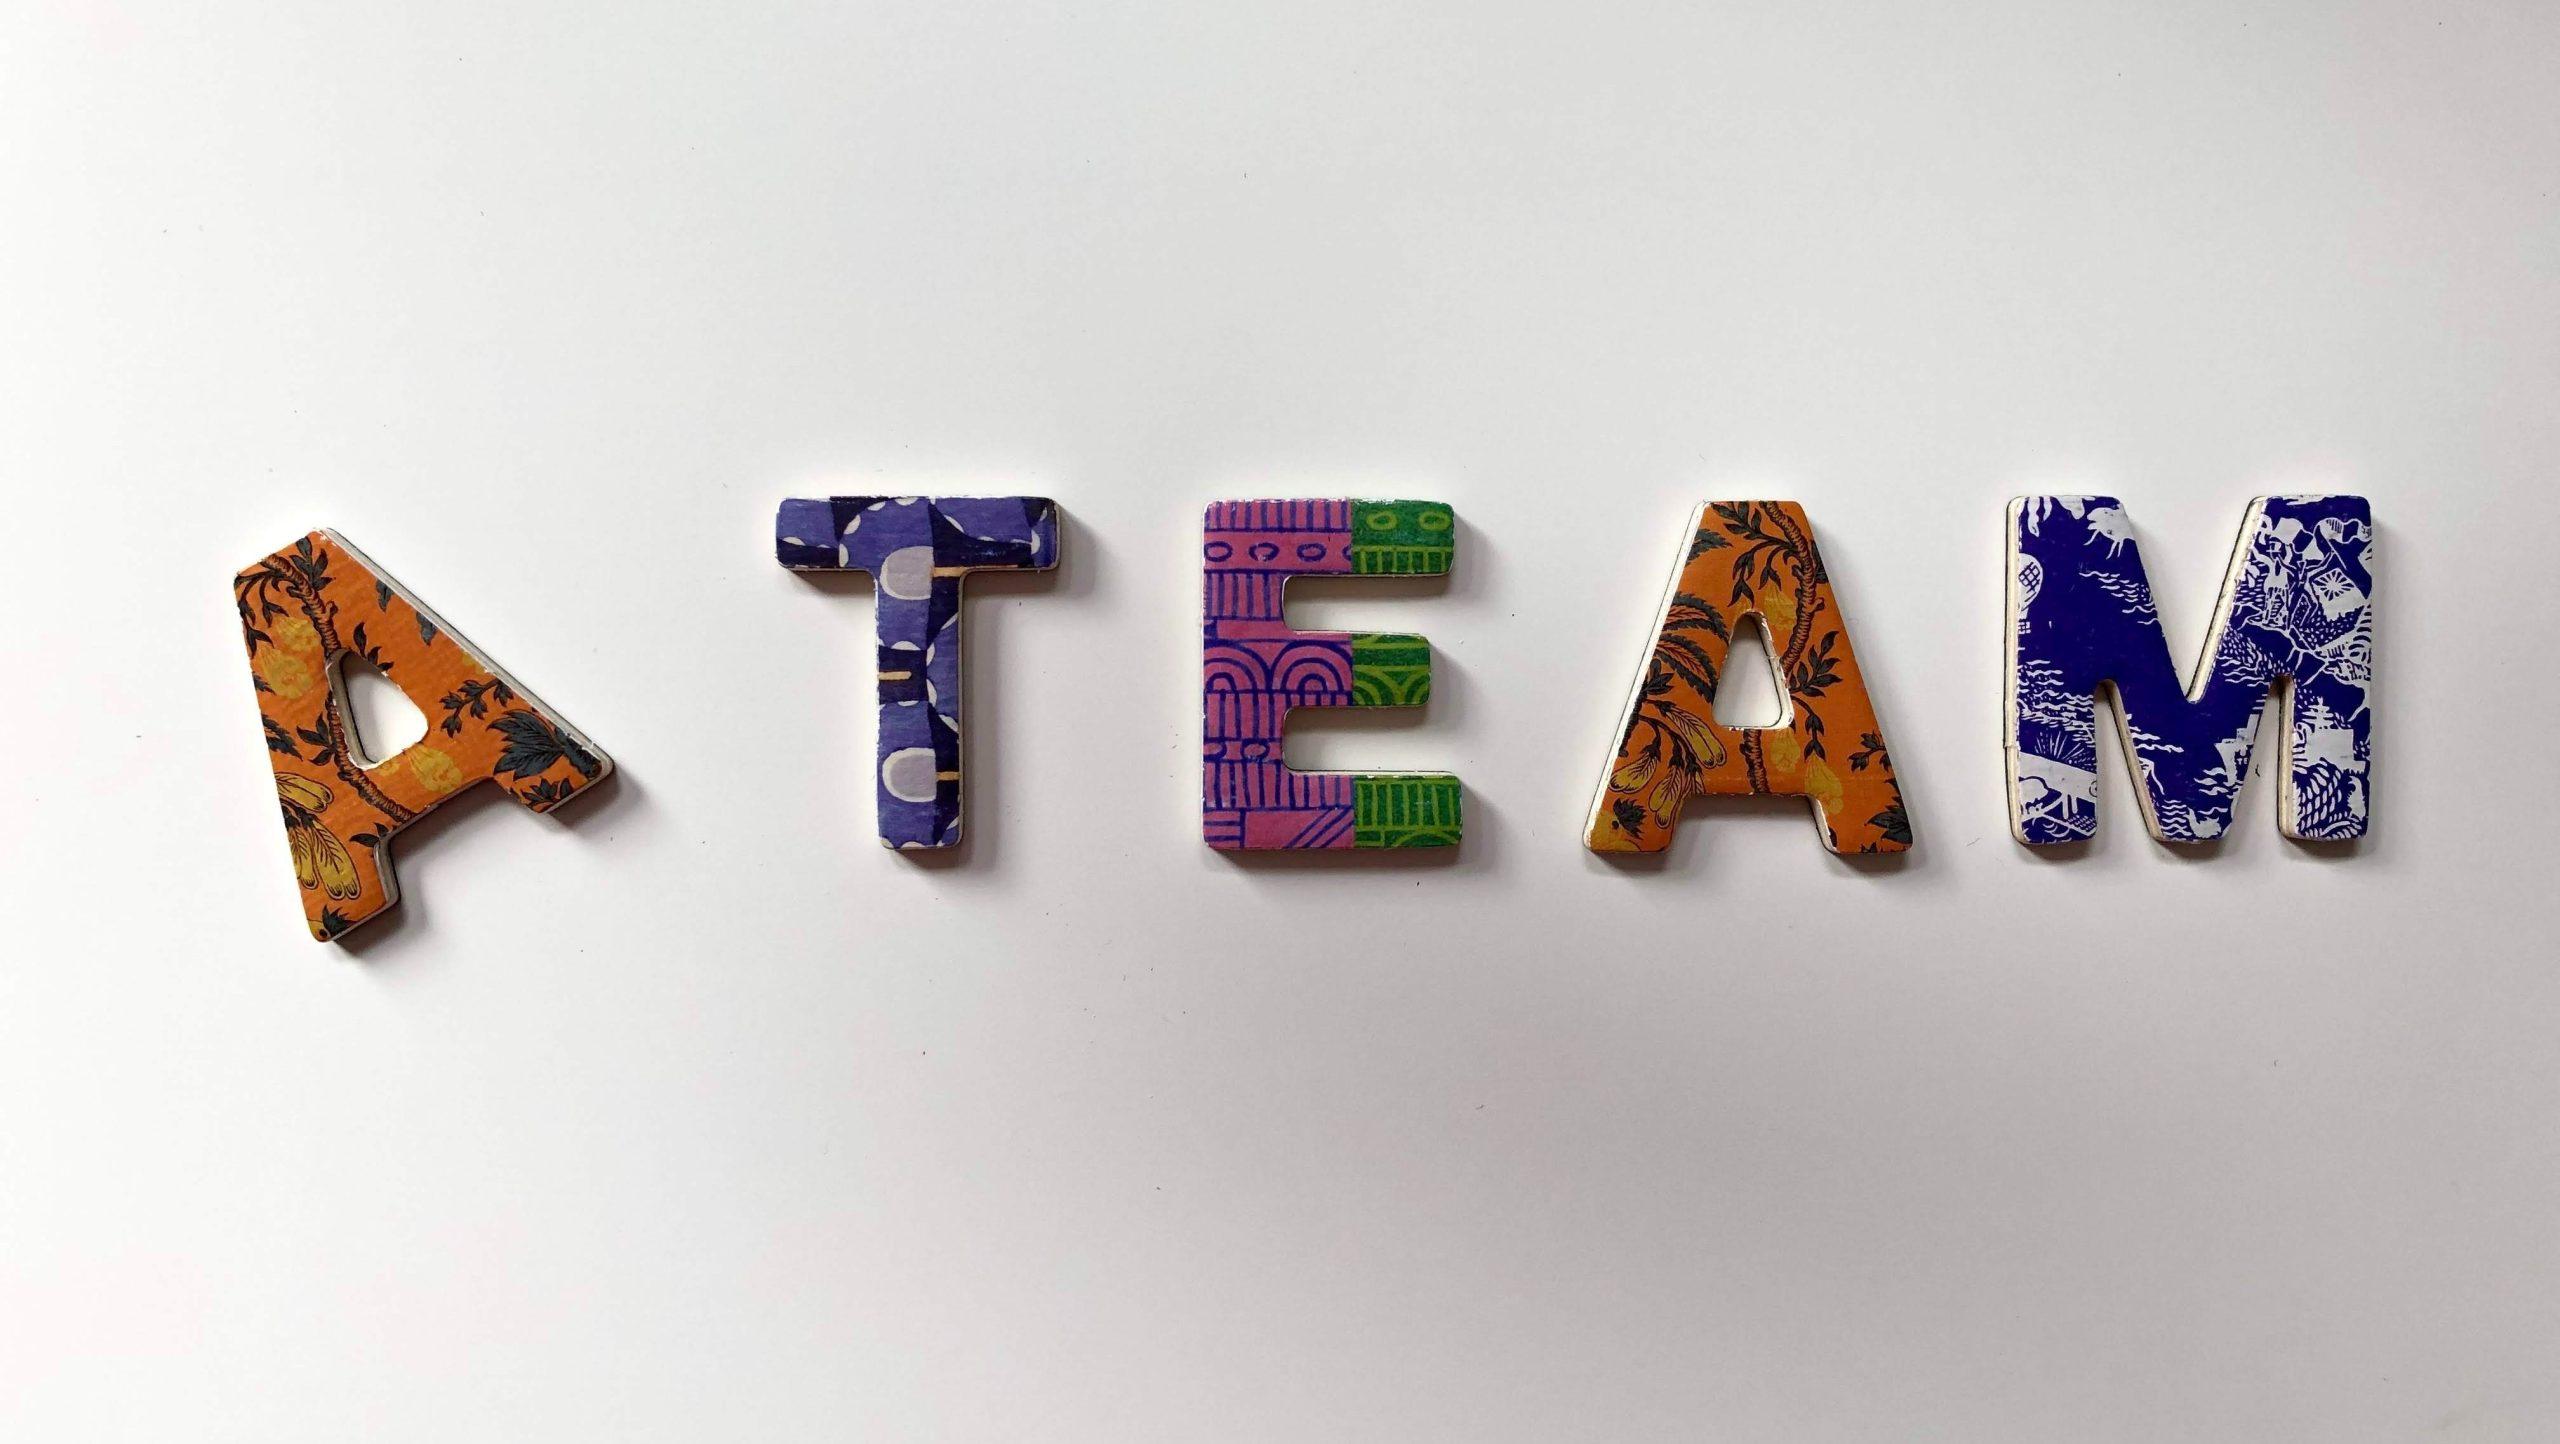 Colourful letters arranged to spell out 'A team' as part of an article about marketing agencies.